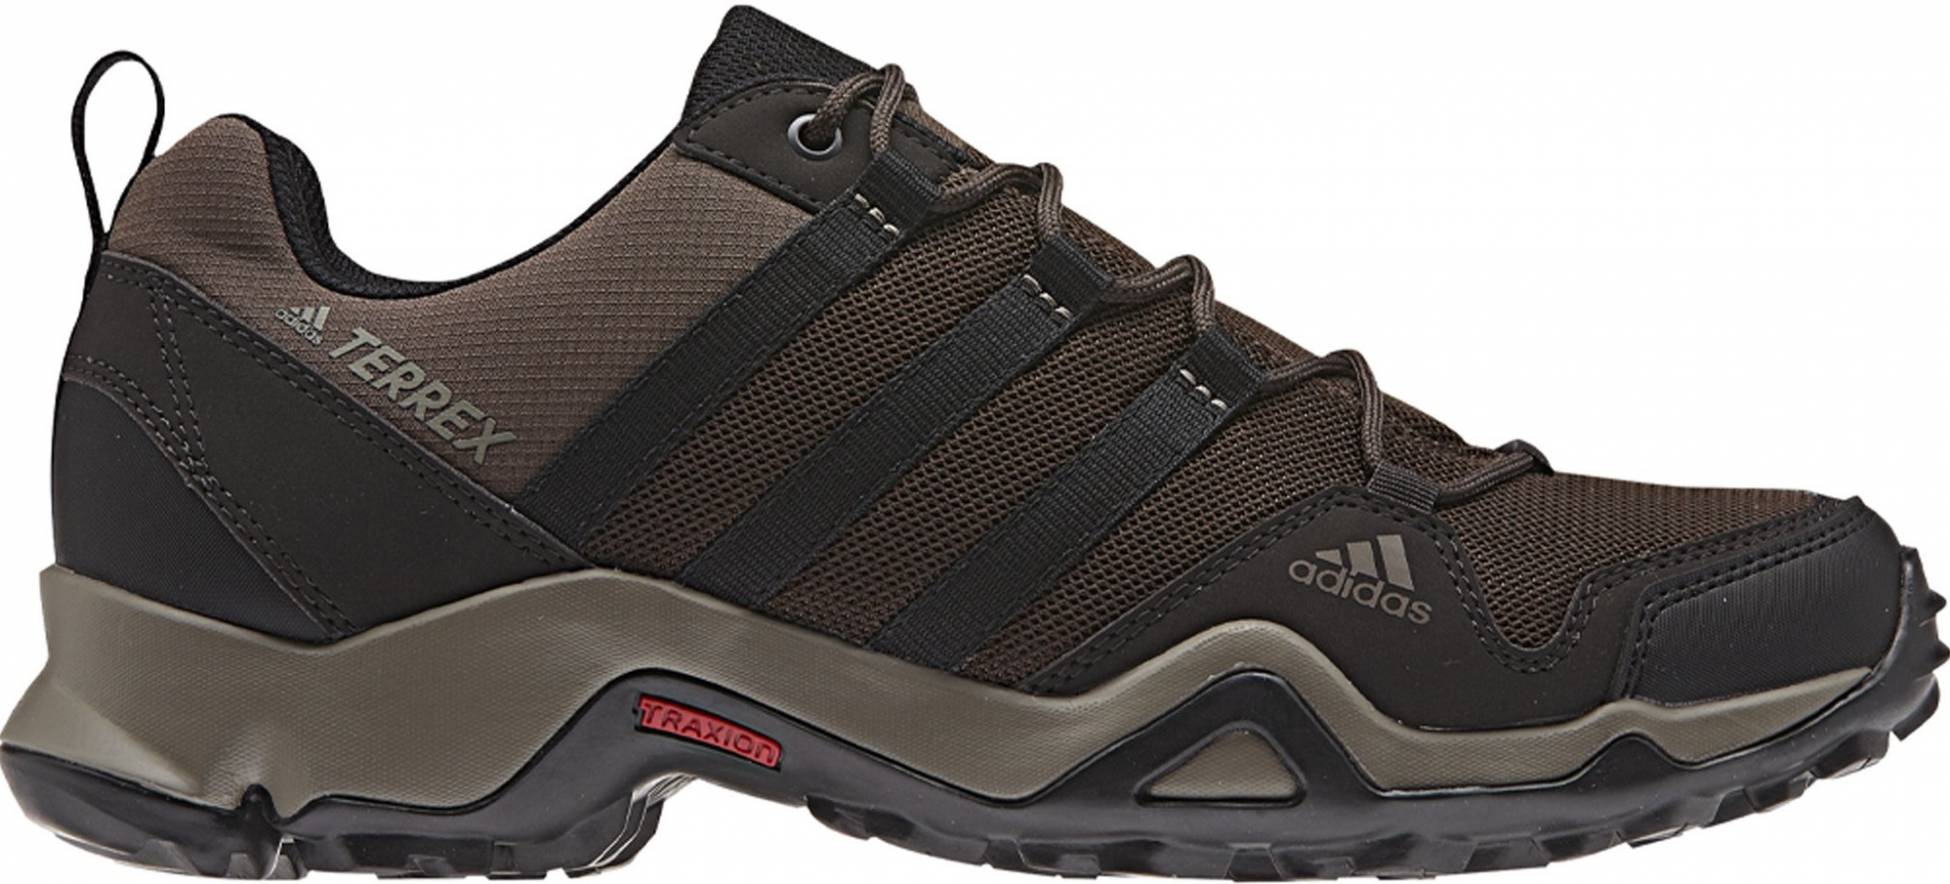 Only $65 + Review of Adidas Terrex AX2R 